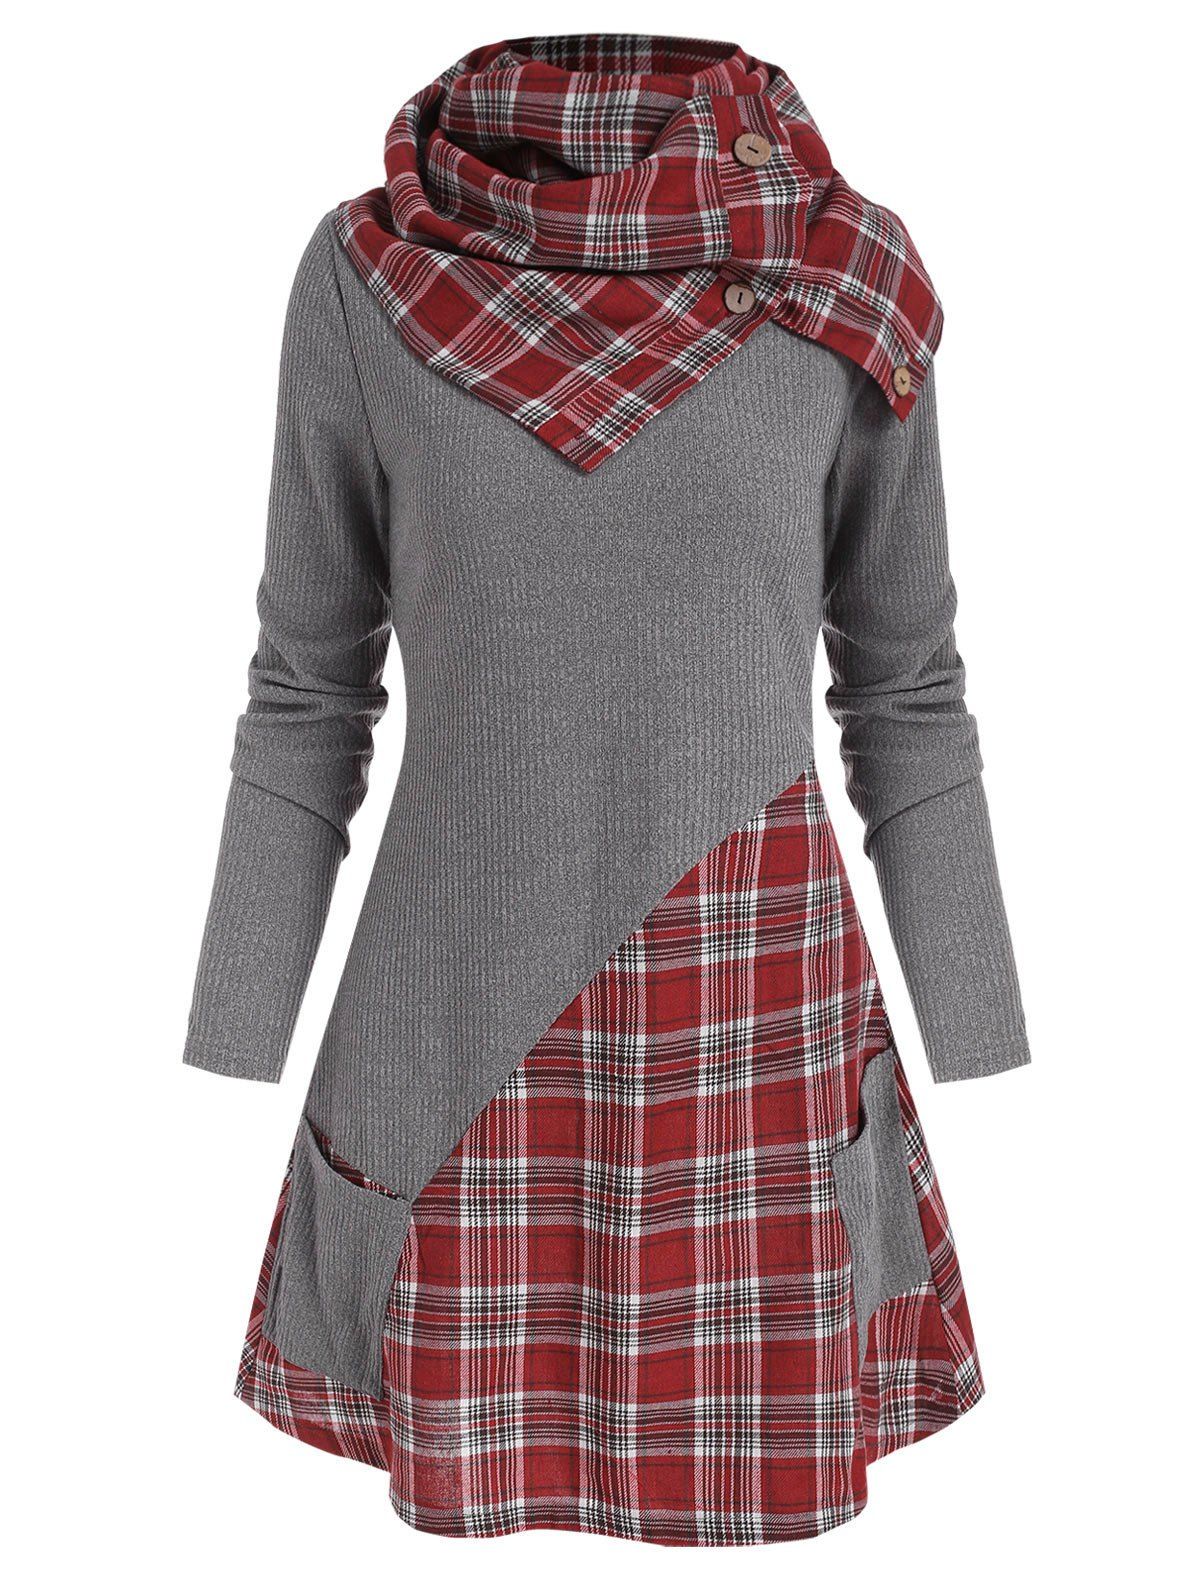 Plaid Insert Pocket Knitwear with Button Scarf - DEEP RED XL